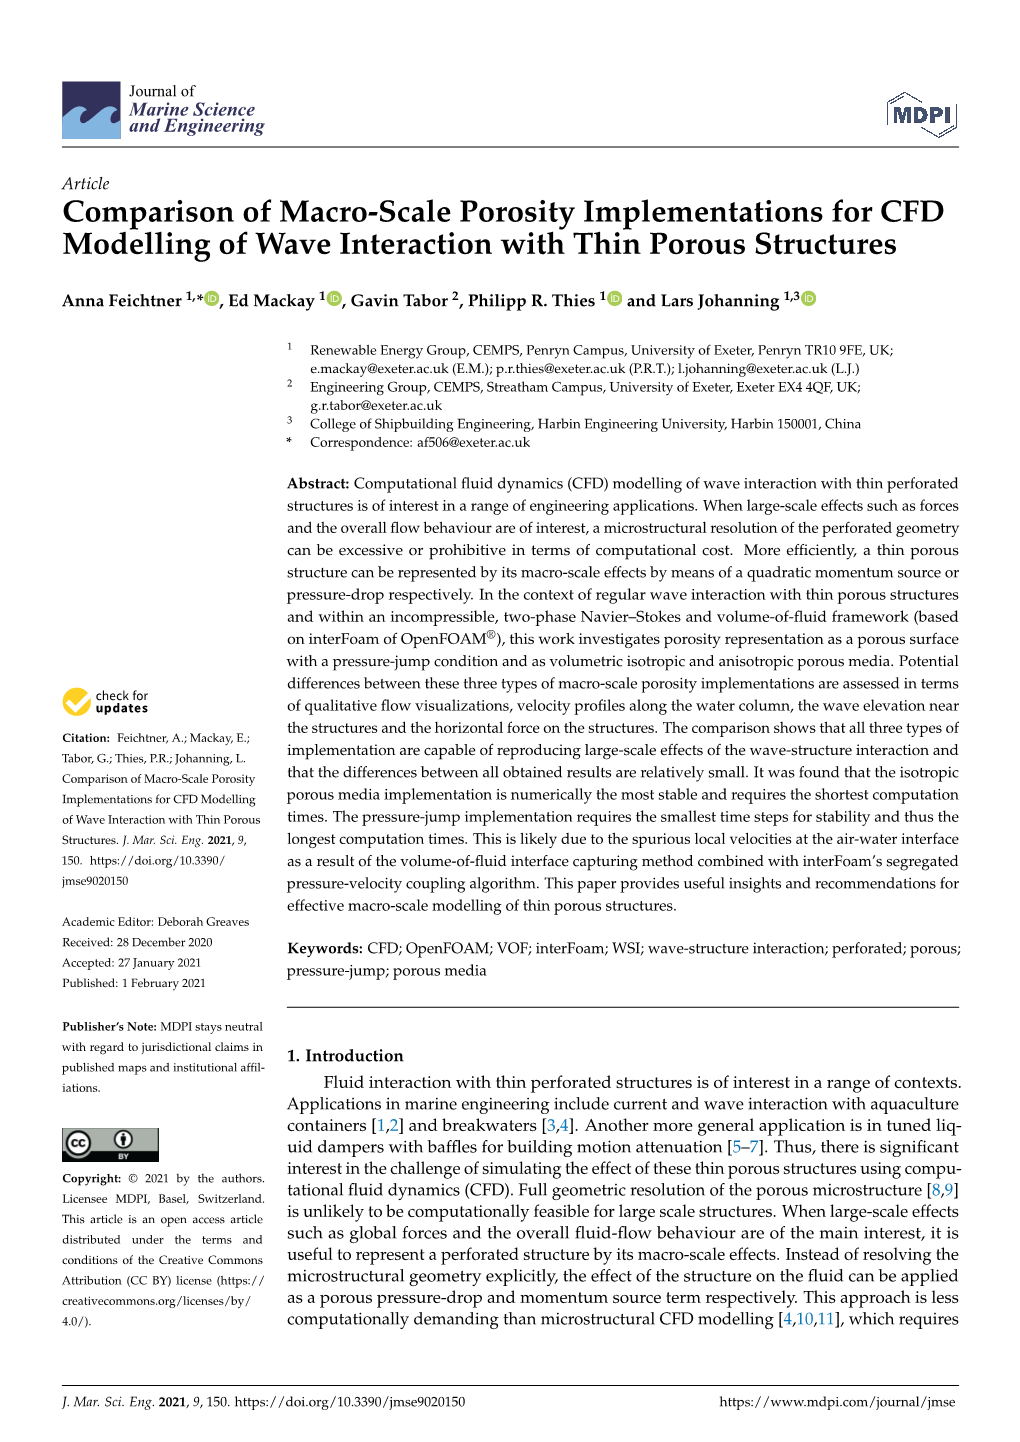 Comparison of Macro-Scale Porosity Implementations for CFD Modelling of Wave Interaction with Thin Porous Structures